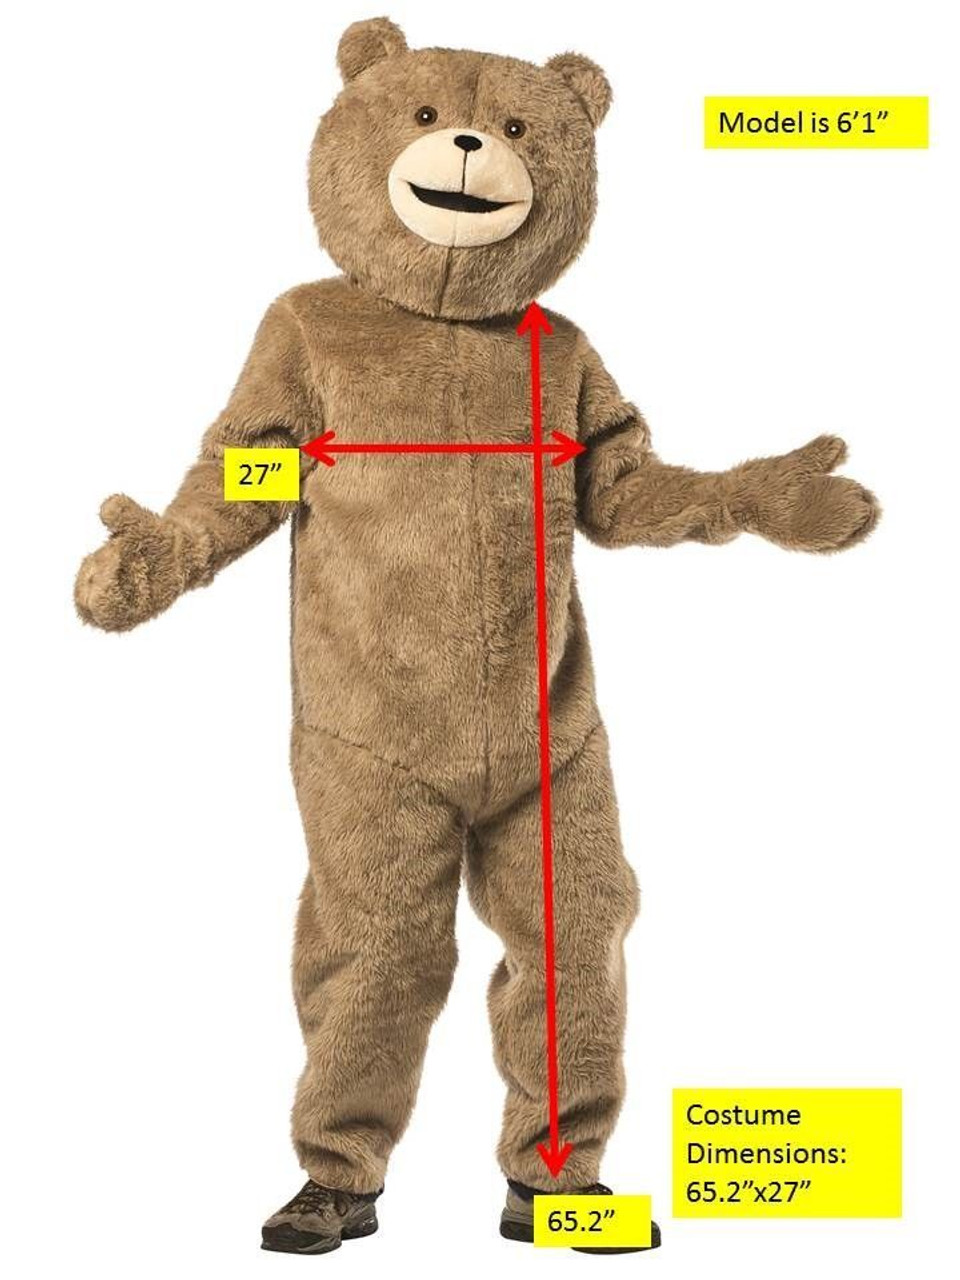 Ted the Movie Costume - Full Body - inset